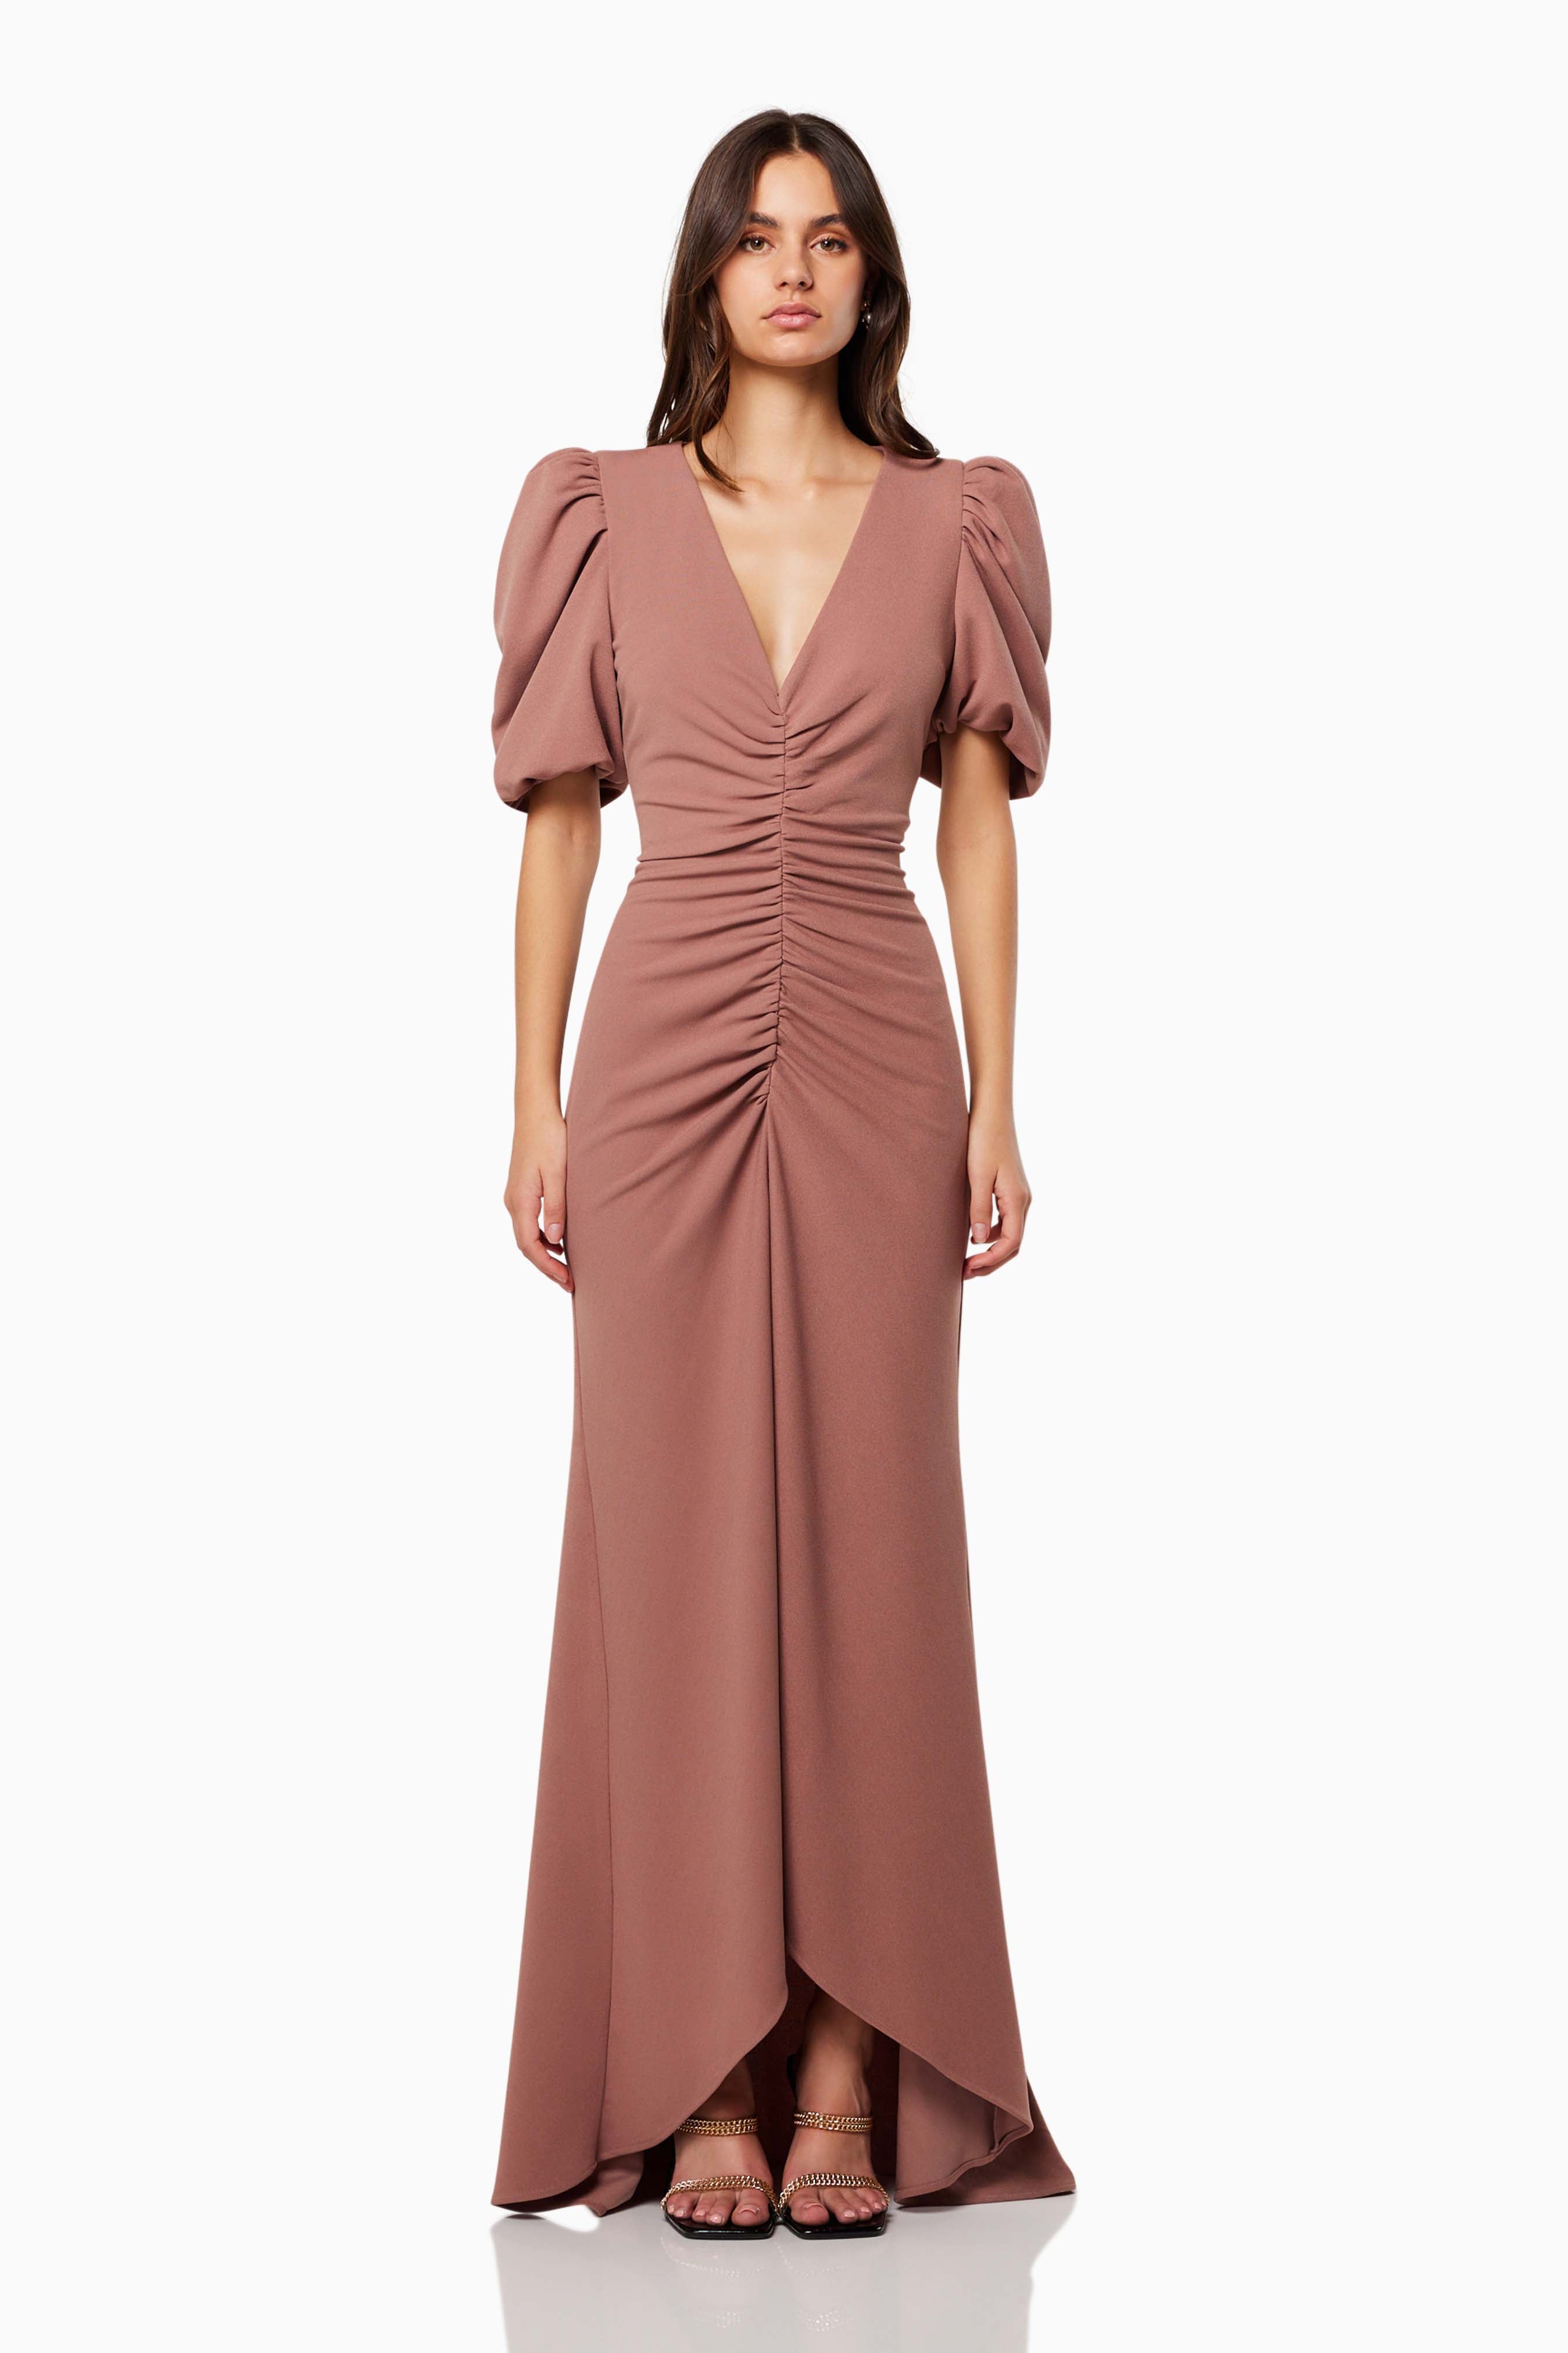 AMARYLLIS SHORT PUFFED MAXI GOWN IN BROWN